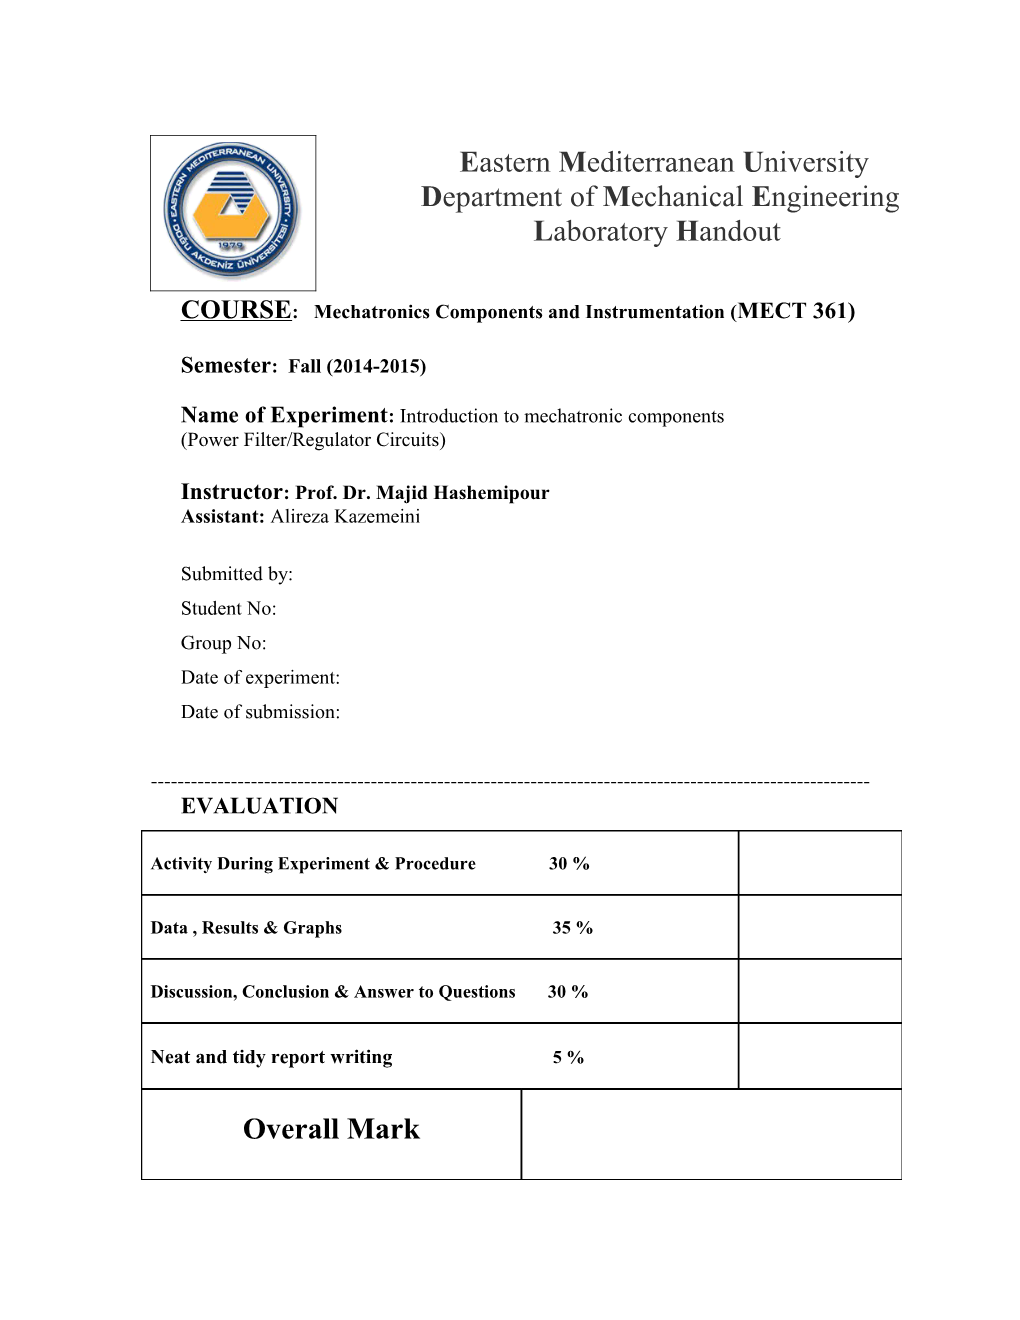 COURSE: Mechatronics Components and Instrumentation (MECT 361)